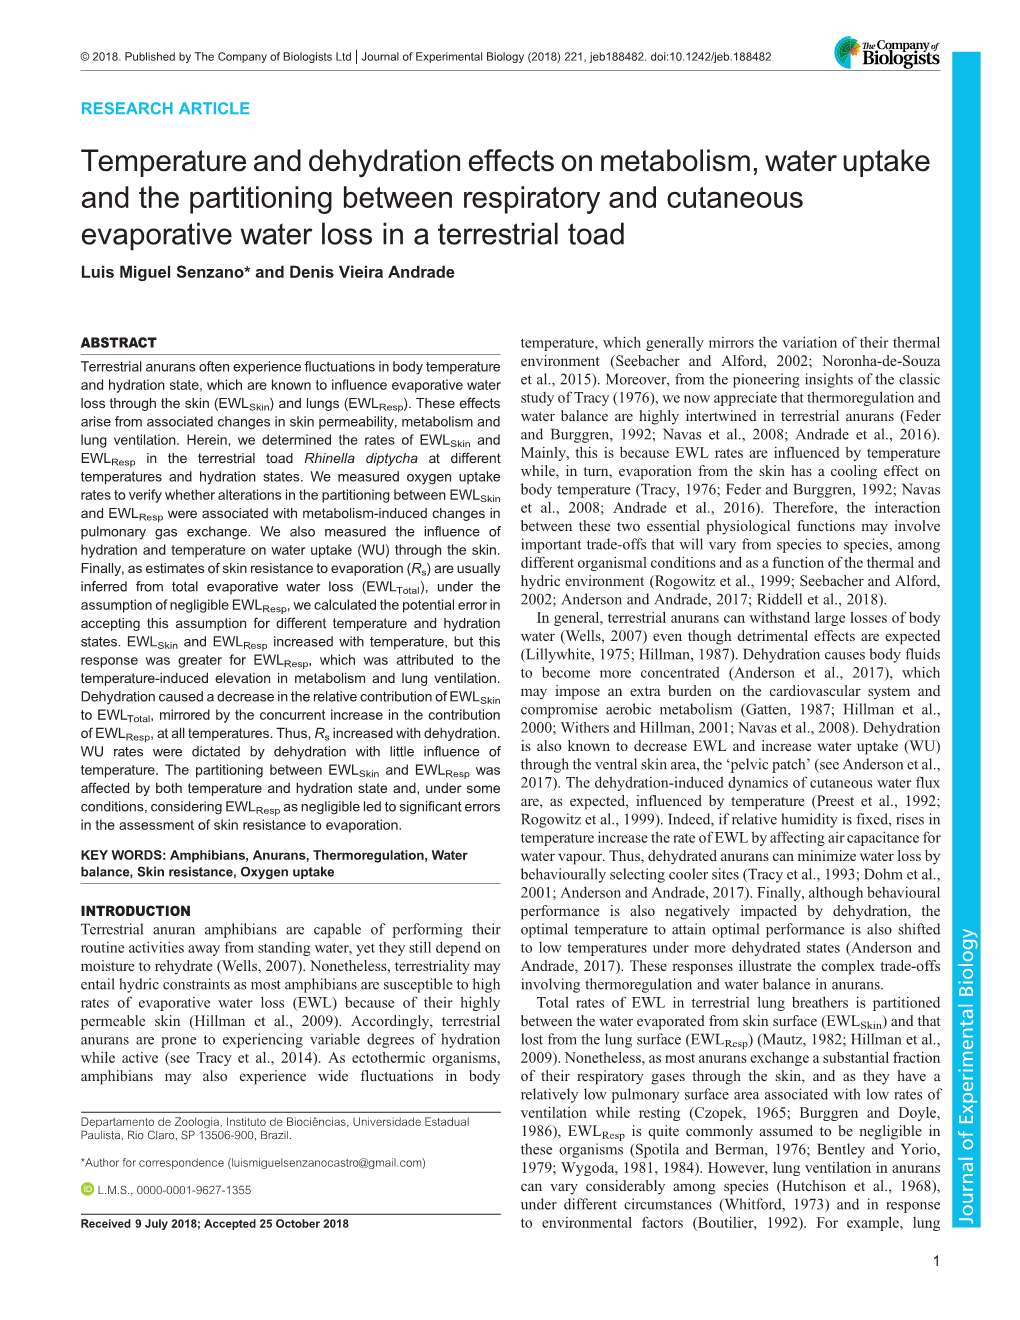 Temperature and Dehydration Effects on Metabolism, Water Uptake and the Partitioning Between Respiratory and Cutaneous Evaporati